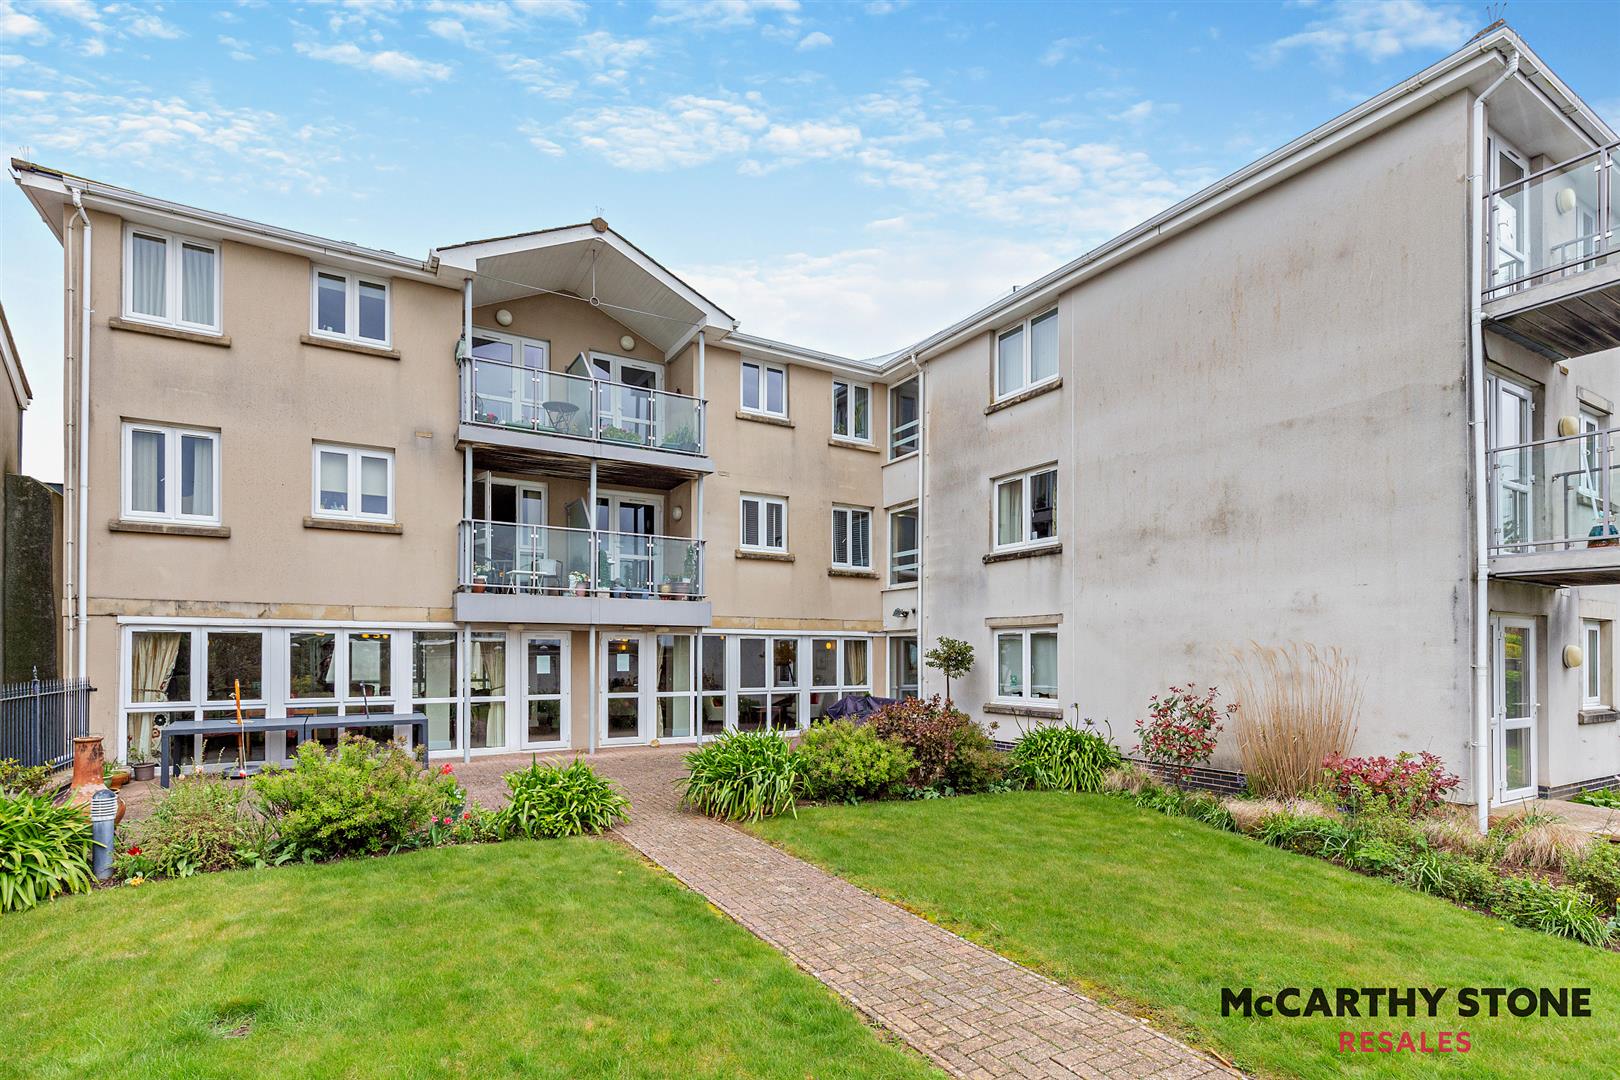 Marina Court, Mount Wise, Newquay, TR7 2EJ